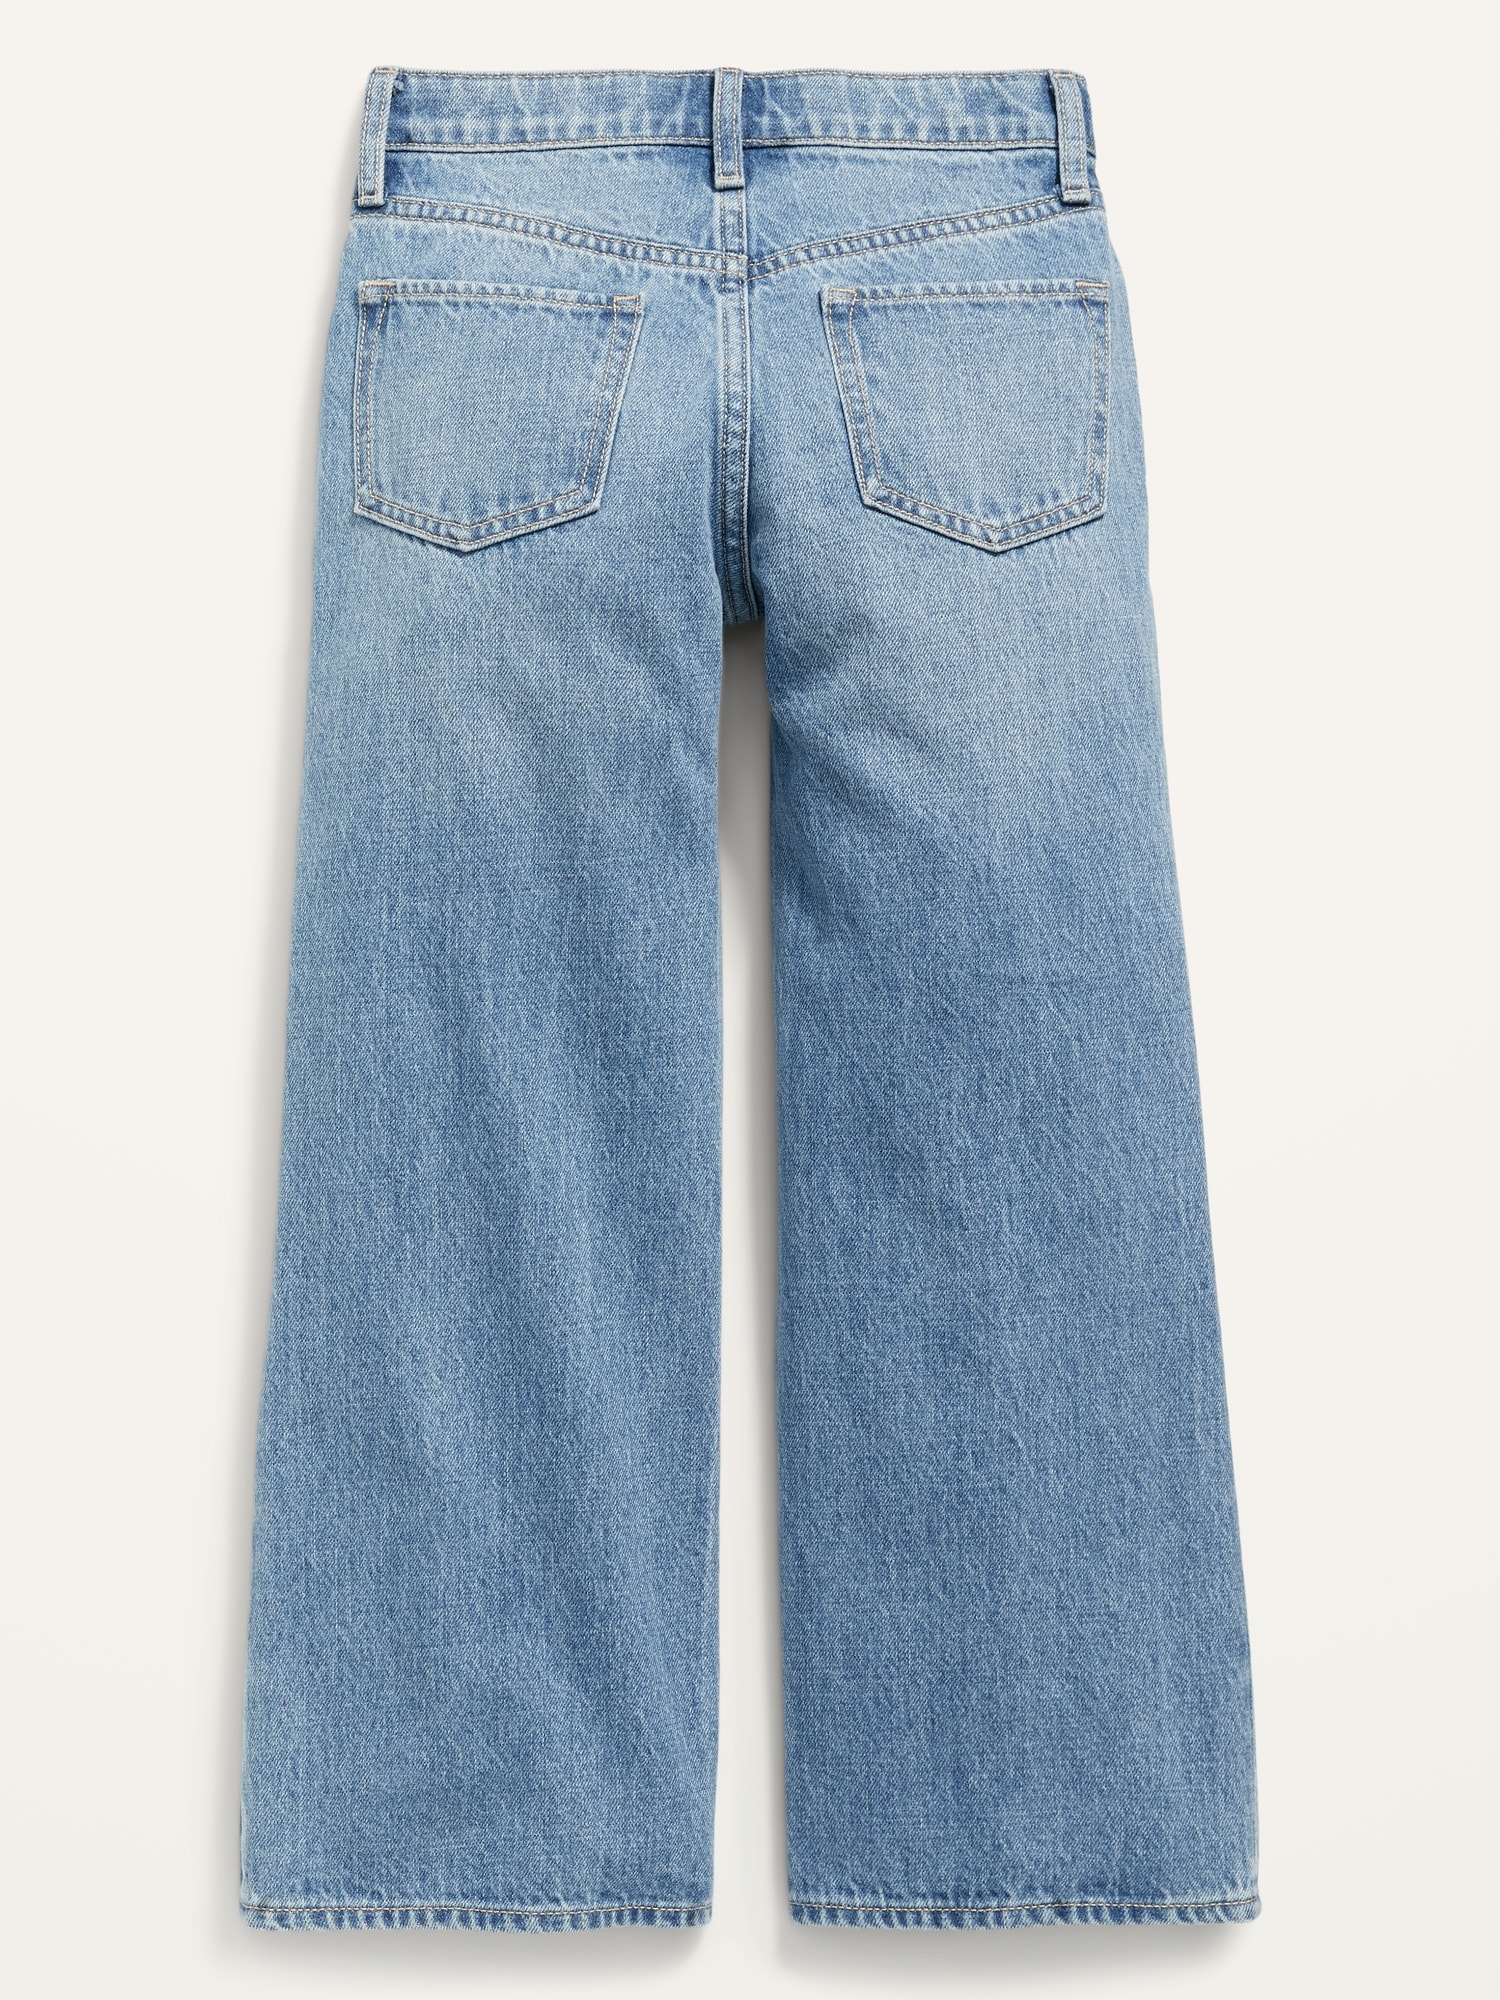 H&M, Jeans, Denim Wide Leg High Waisted Jeans Size 8